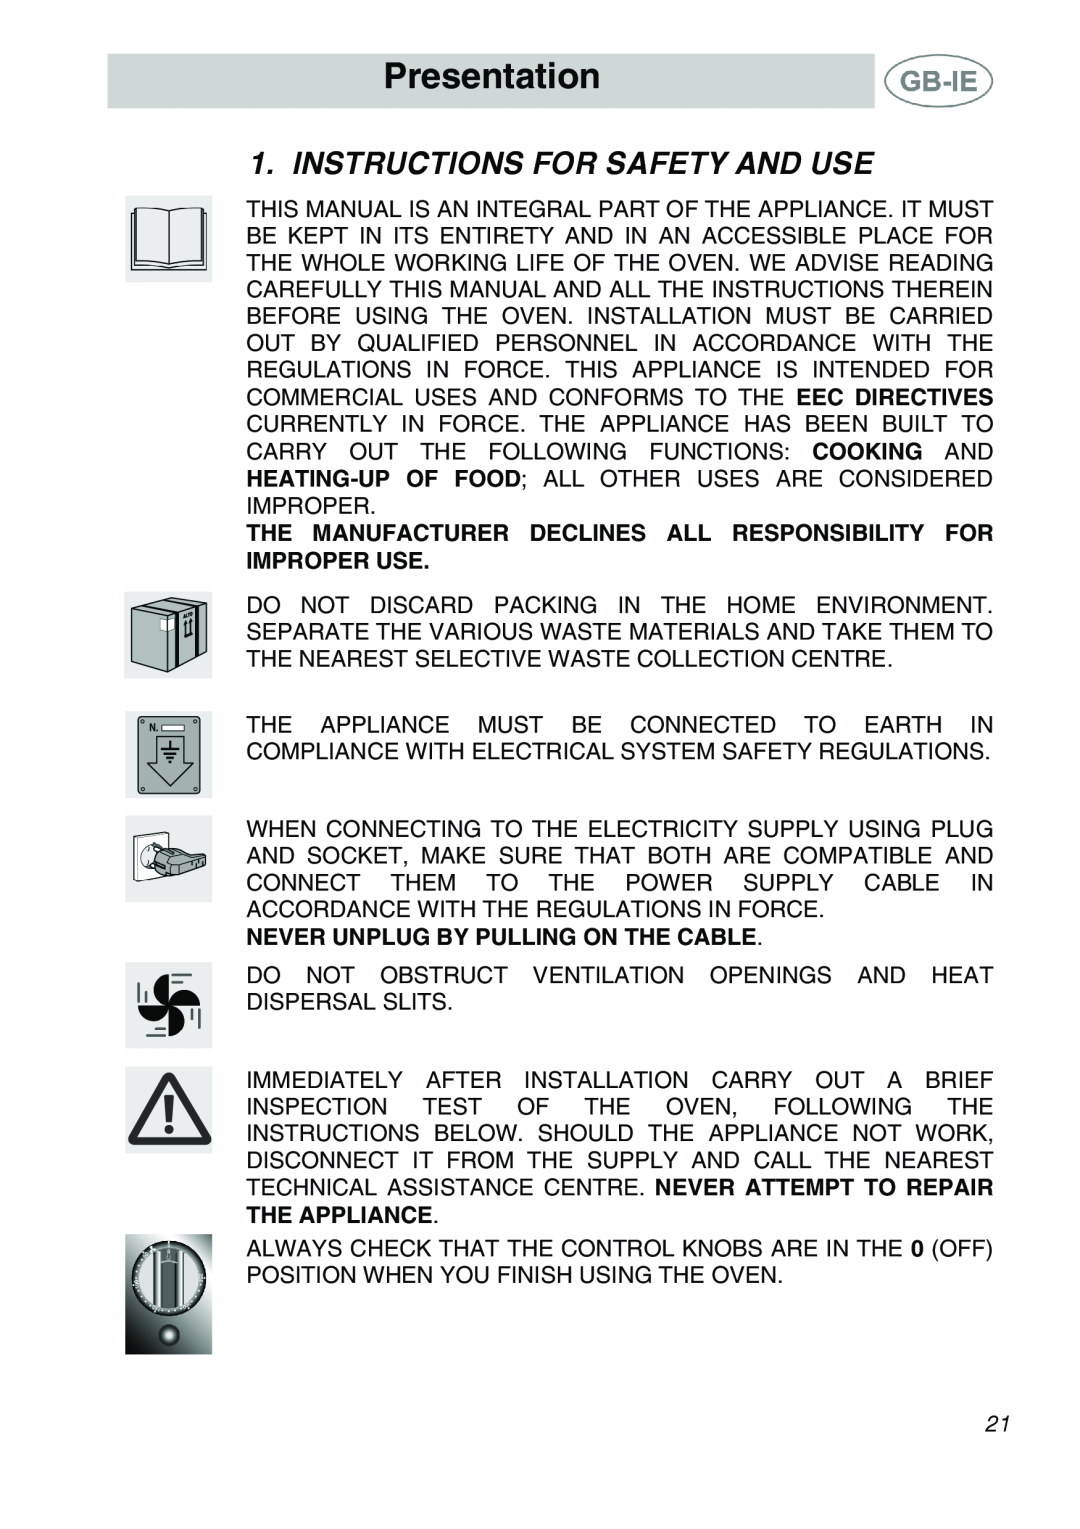 Smeg ALFA41AM, ALFA41DA Presentation, Instructions For Safety And Use, Never Unplug By Pulling On The Cable, The Appliance 